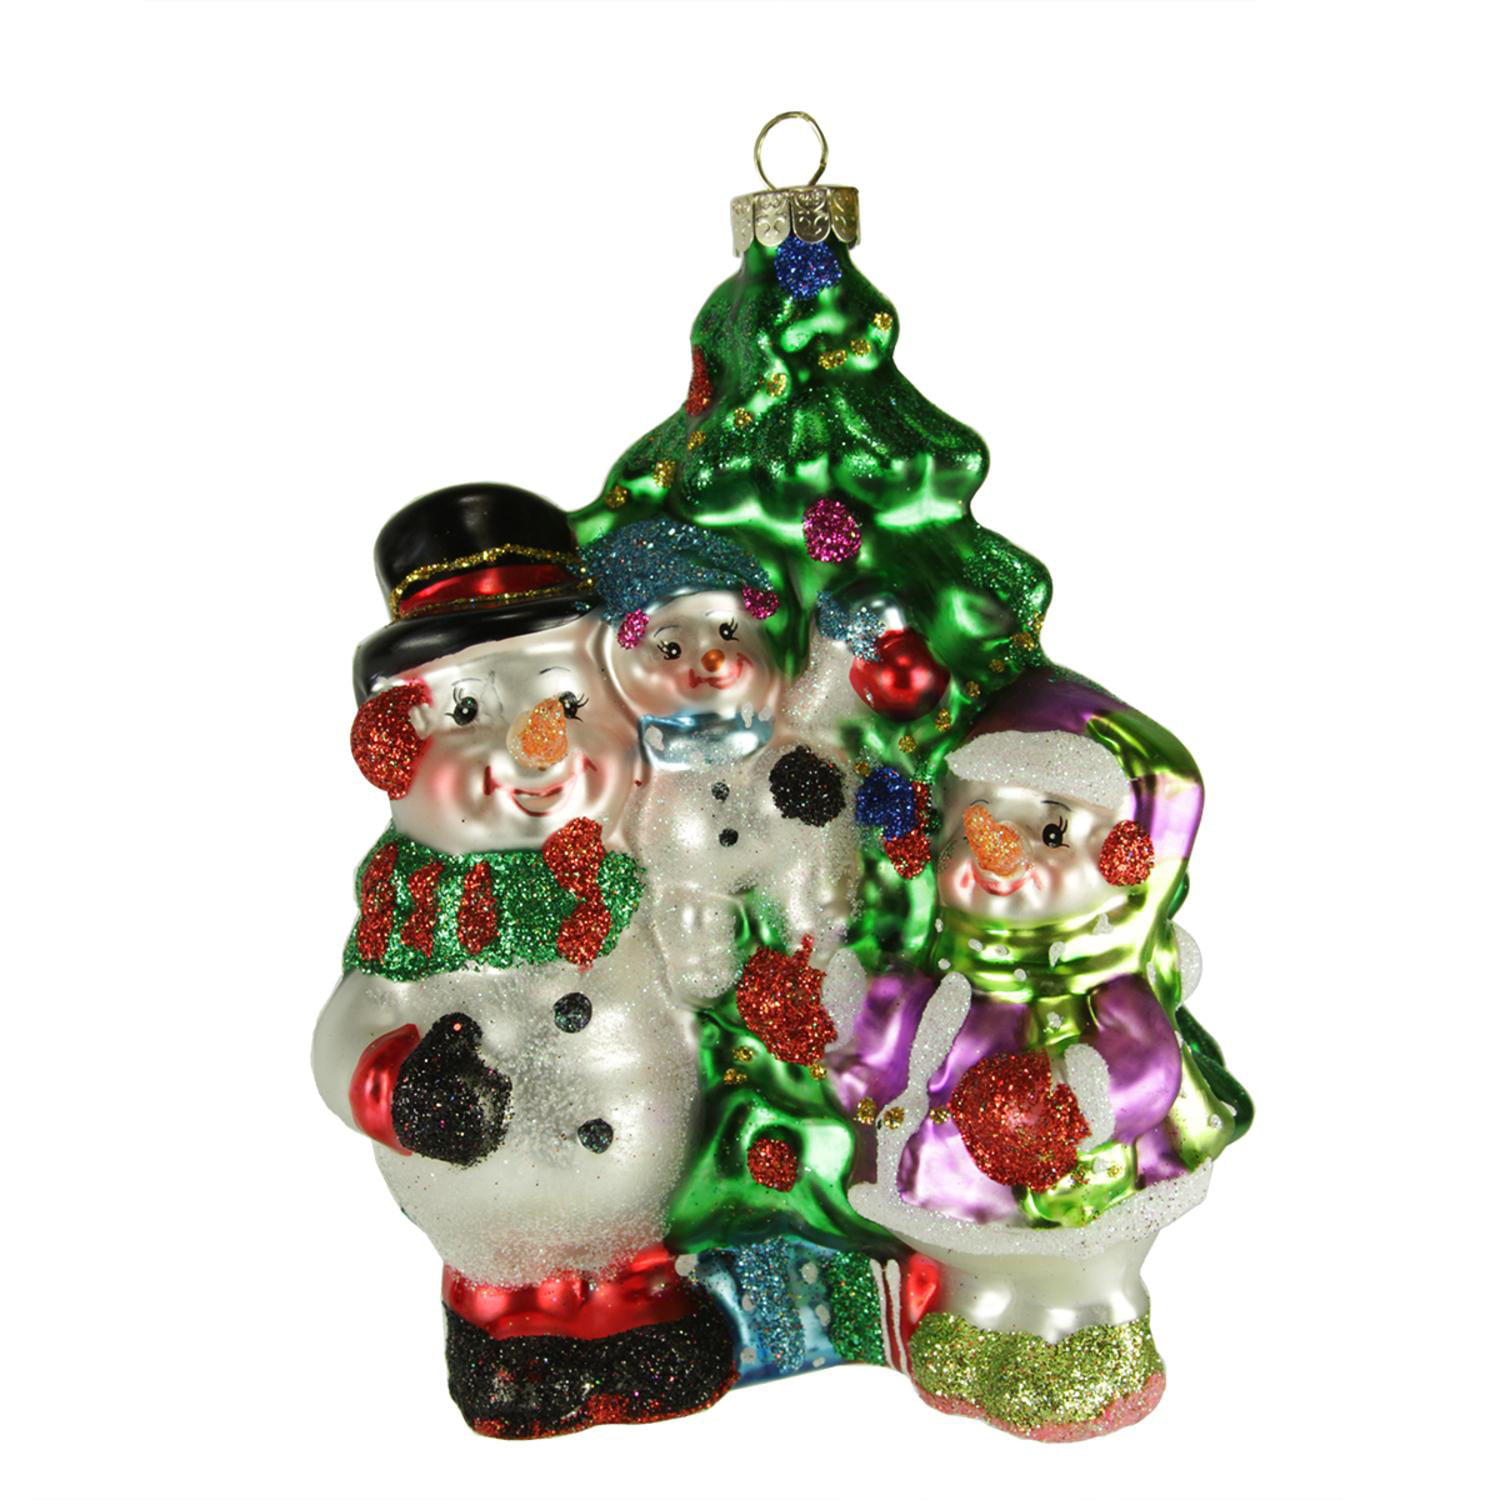 All Is Brite Christmas Hand Painted Glass Ornaments Snowman Vintage Design